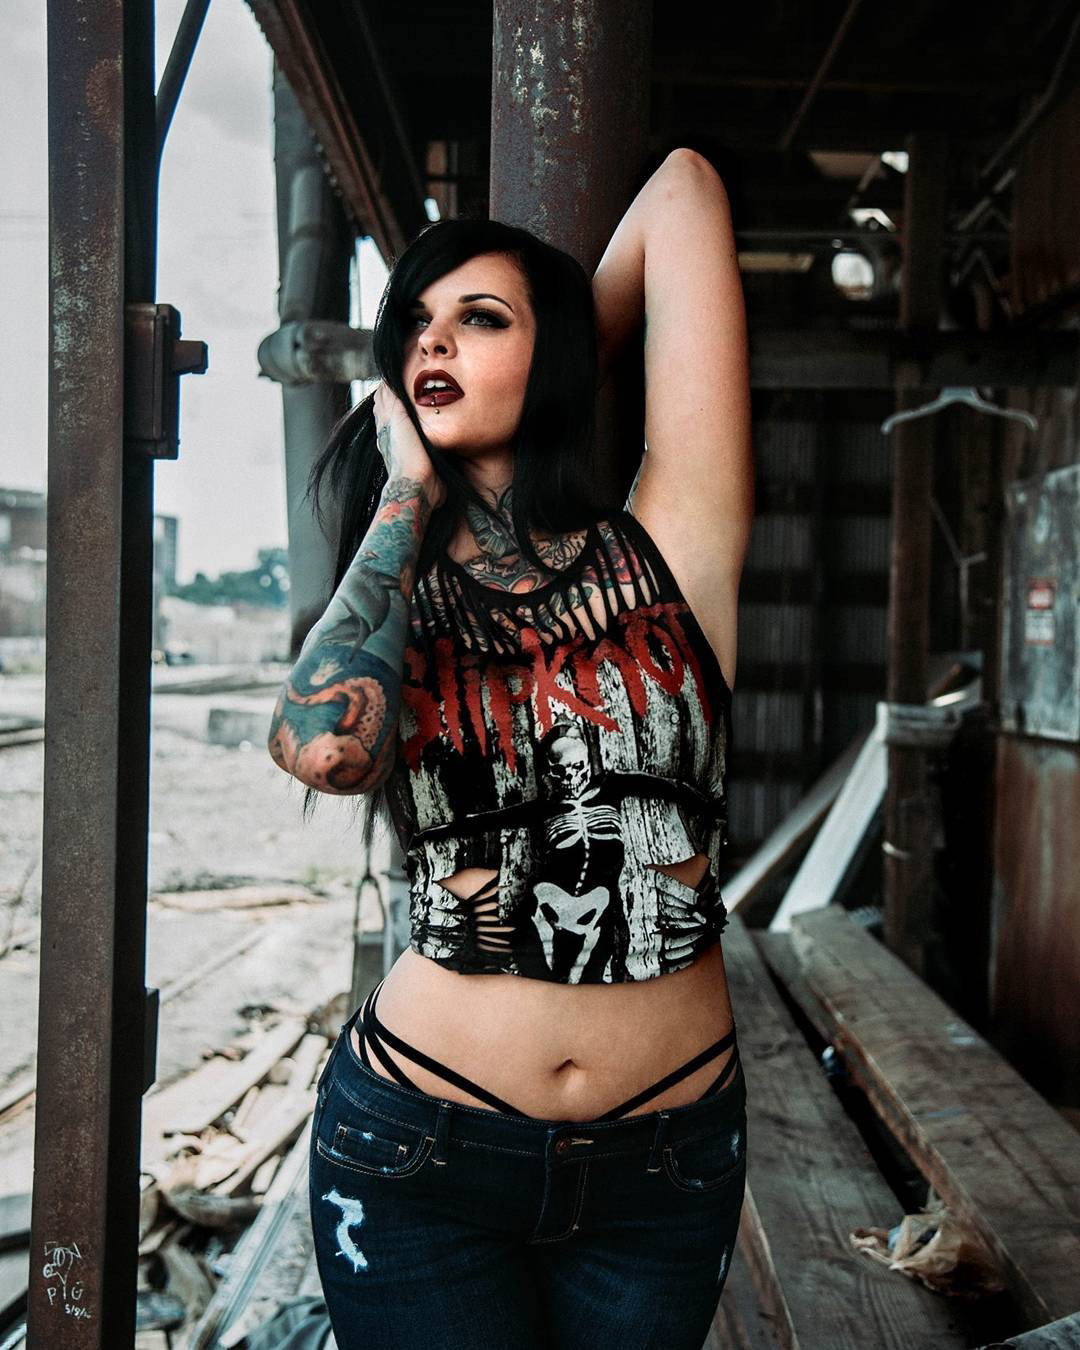 Photo by earlgreyatmidnight with the username @earlgreyatmidnight,  October 7, 2018 at 5:41 PM and the text says 'I&rsquo;m ripped across the ditch and settled in the dirtSarah ClaxtonIG: sarahclaxtonmodeling #slipknot  #music  #metal  #hard  #rock  #tattoo  #tattoos  #girls  #with  #tattoos  #inked  #ink  #inked  #babes  #lingerie'